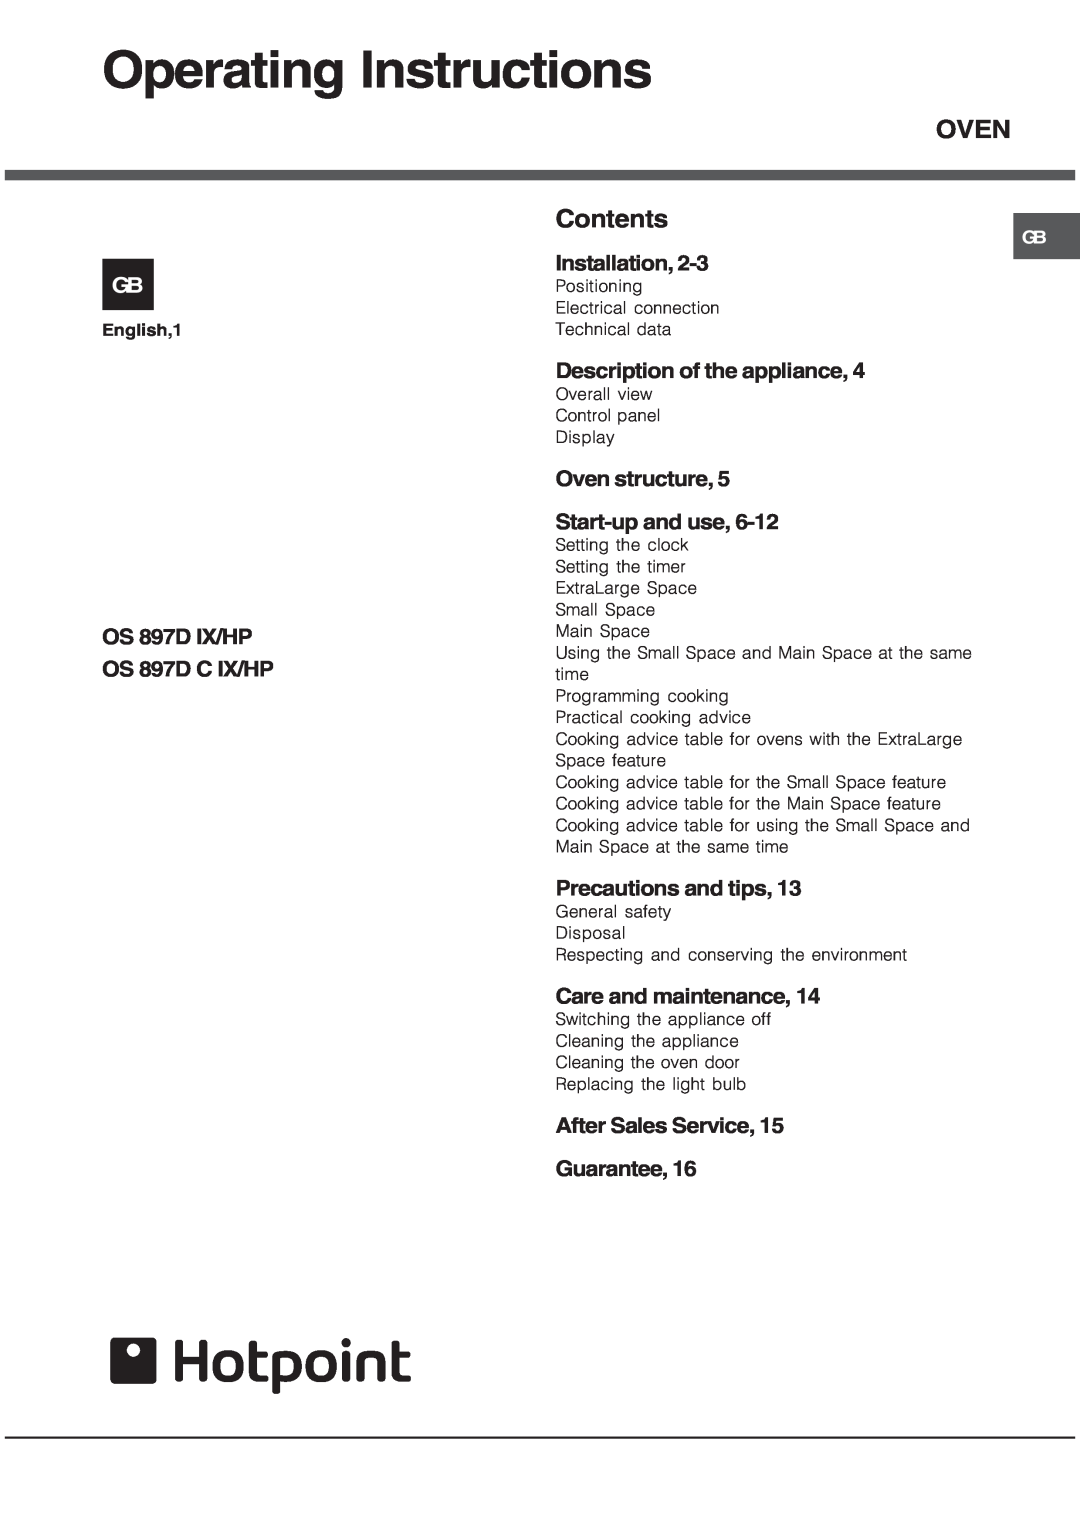 Hotpoint OS 897D C IX manual Operating Instructions, Installation, Description of the appliance, Precautions and tips 